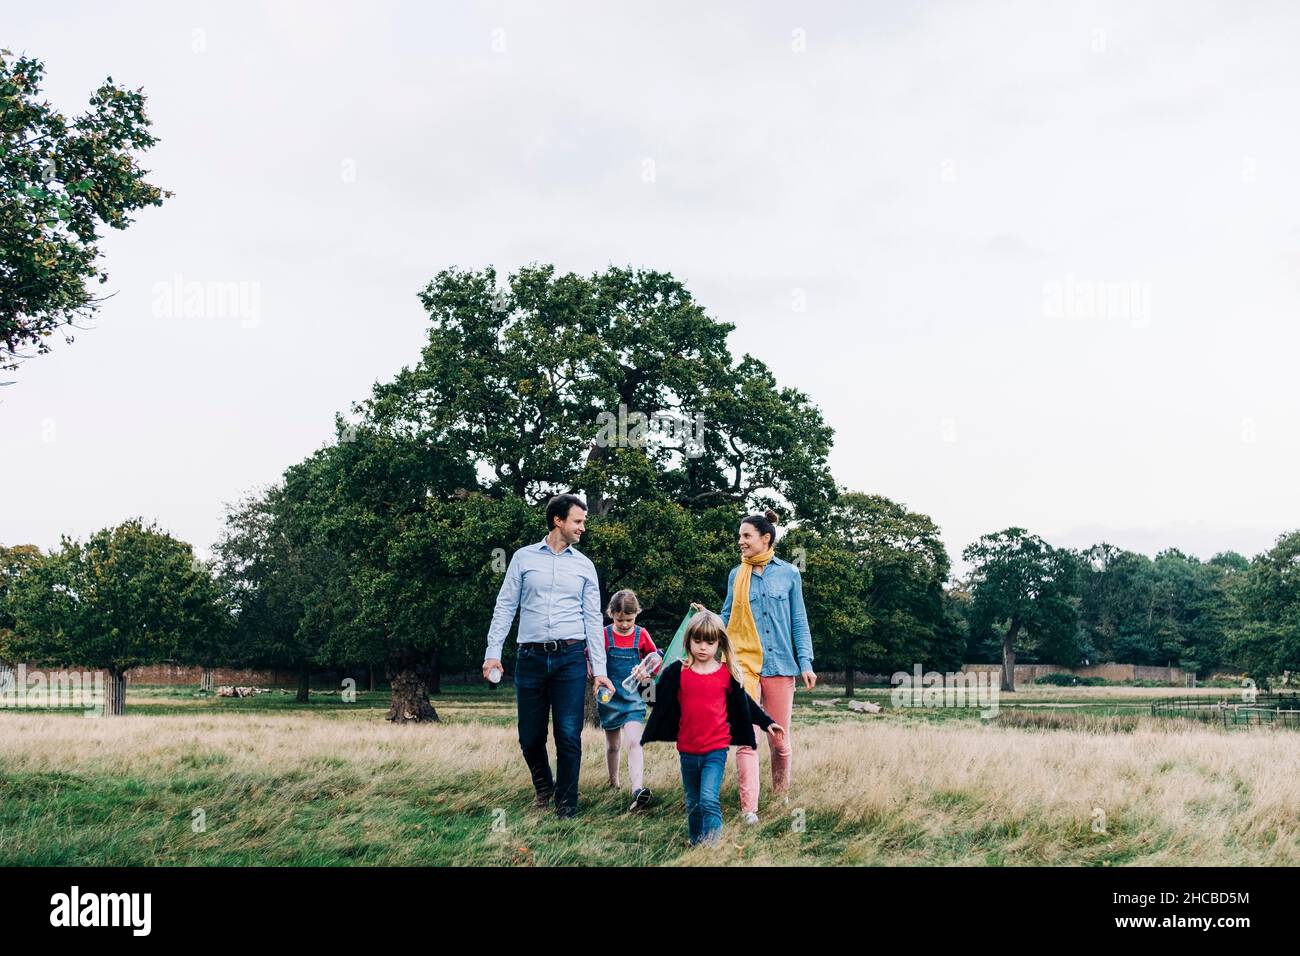 Family doing cleanup together in public park Stock Photo